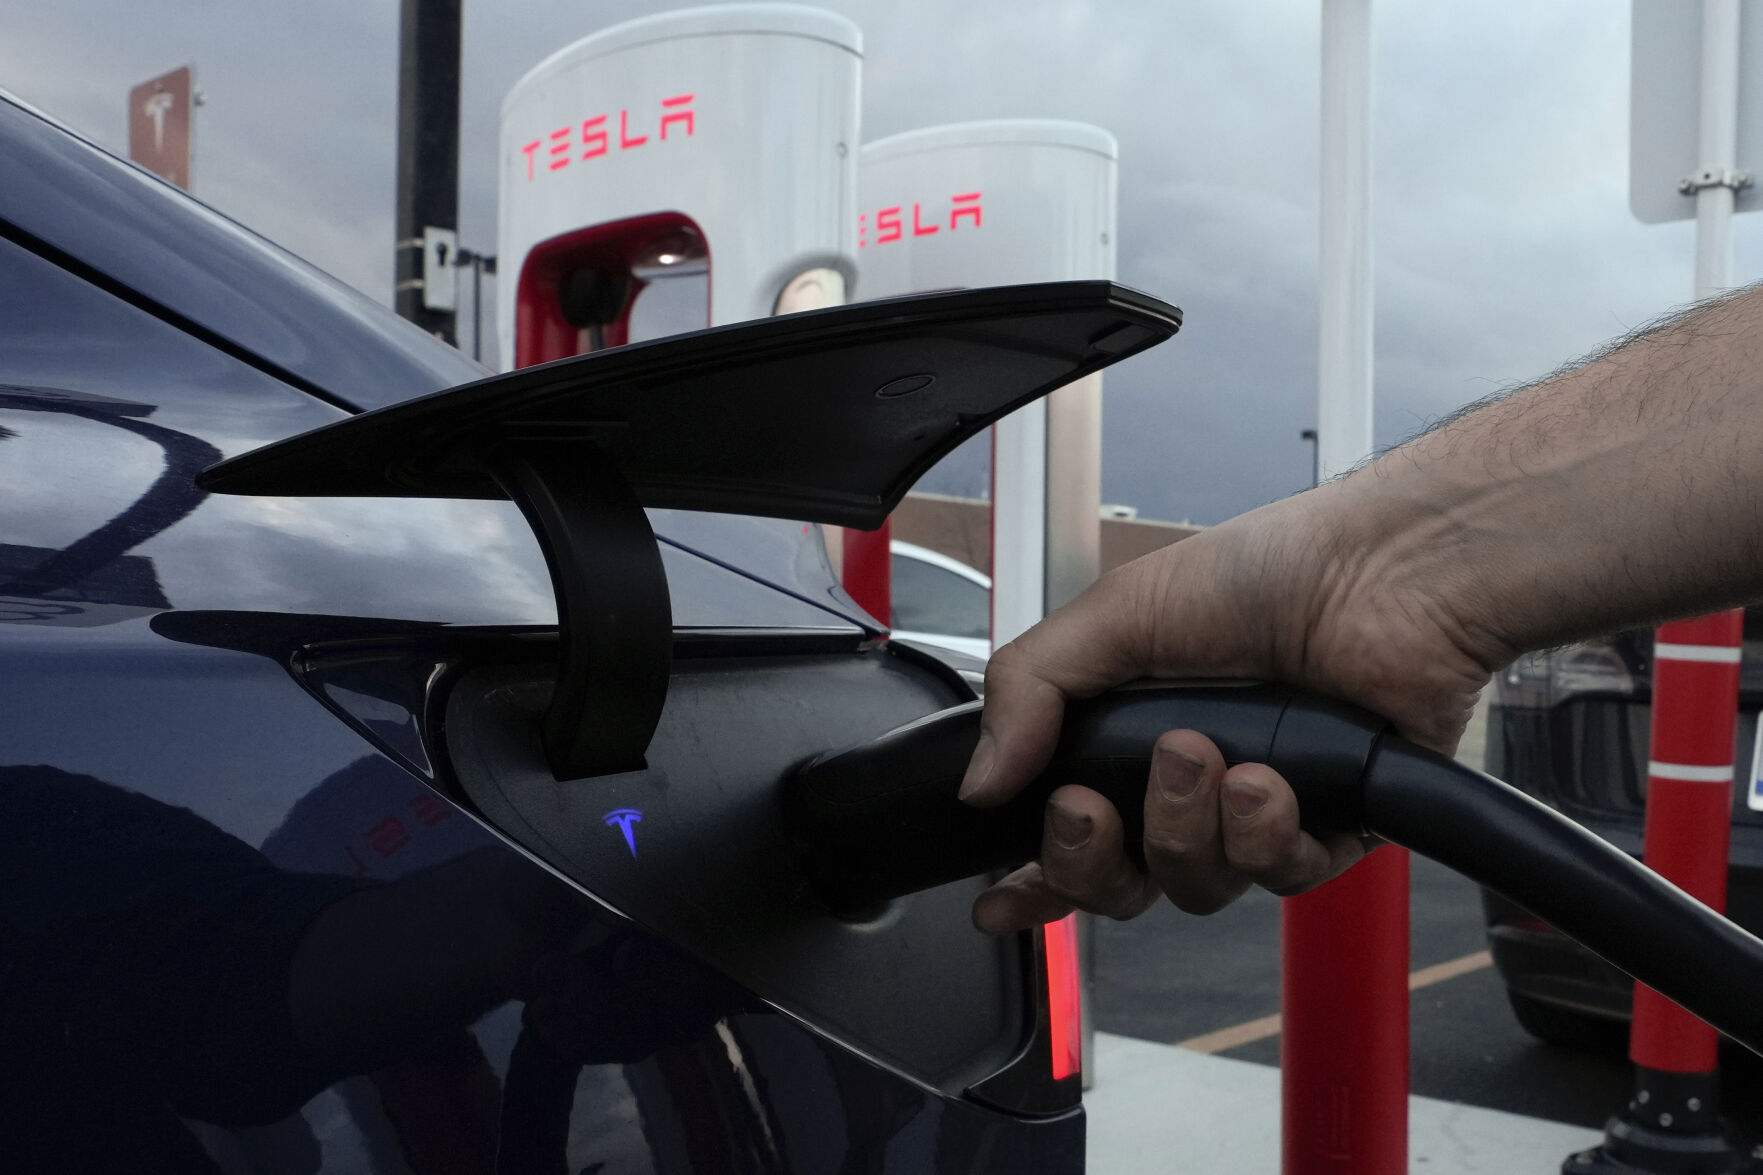 <p>FILE - A motorist charges his electric vehicle at a Tesla Supercharger station in Detroit, Wednesday, Nov. 16, 2022. About half of U.S. adults say they are not likely to go electric when it comes time to buy a new vehicle, a new poll by The Associated Press-NORC Center for Public Affairs Research and the Energy Policy Institute at the University of Chicago shows. (AP Photo/Paul Sancya, File)</p>   PHOTO CREDIT: Paul Sancya 